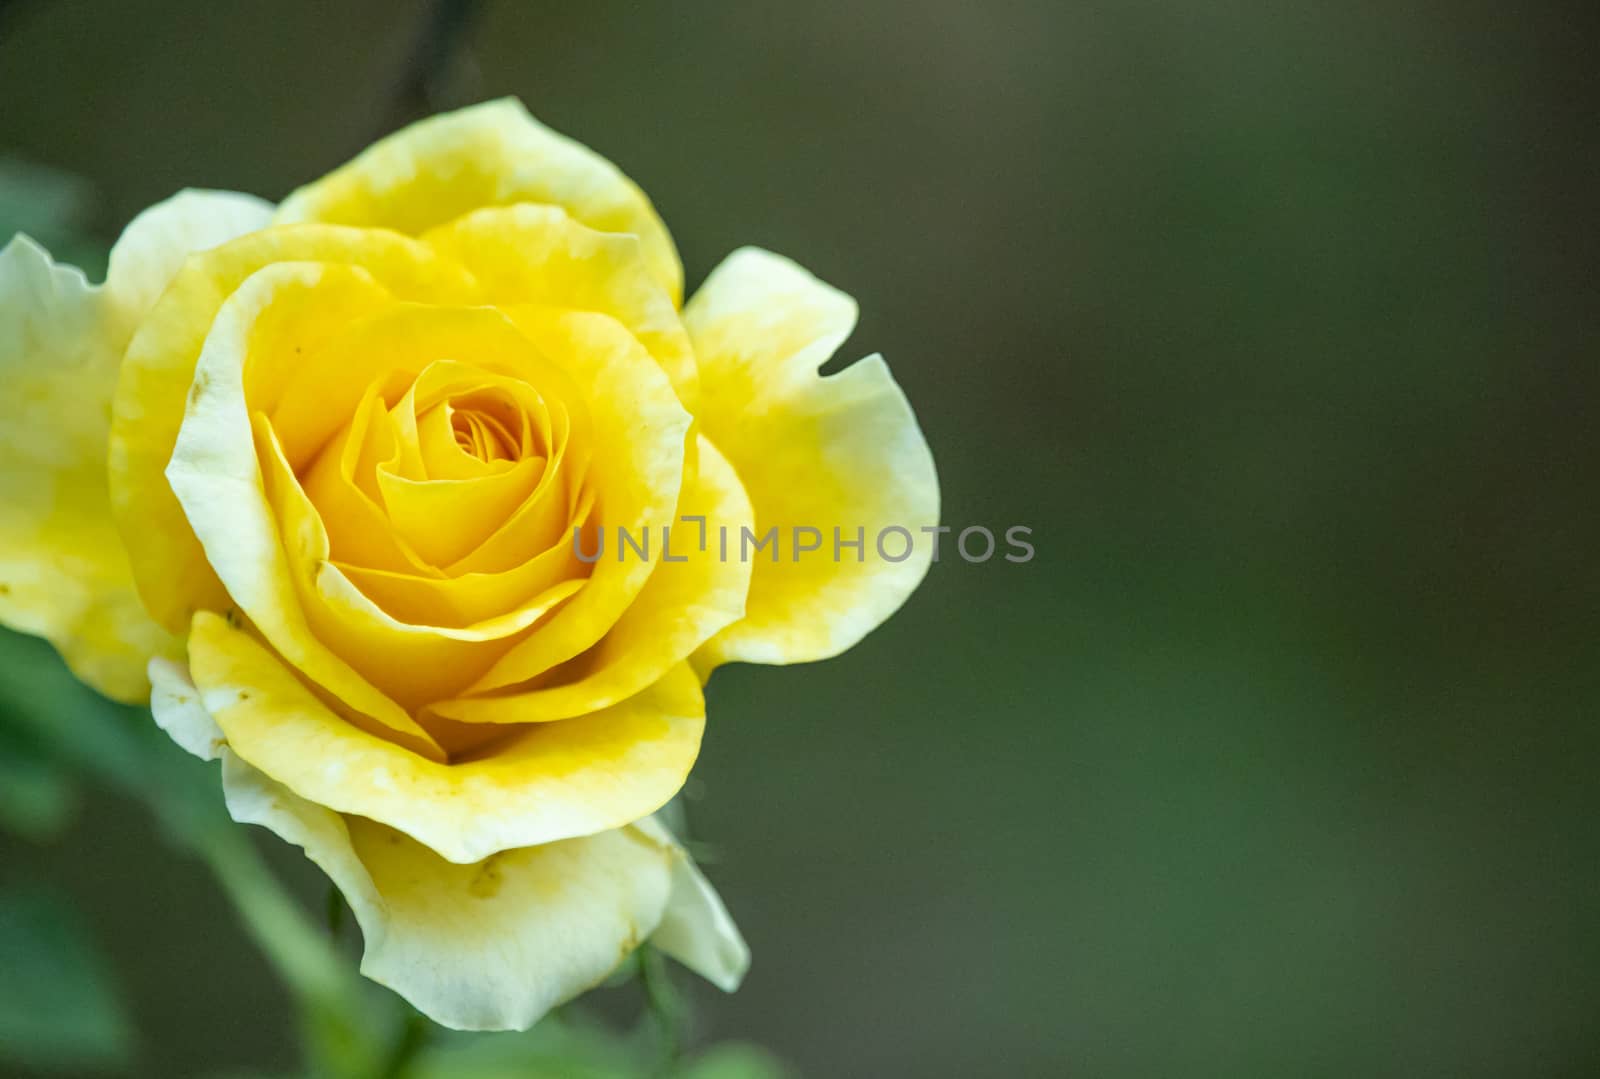 YELLOW ROSE FLOWER WITH COPY SPACE BACKGROUND